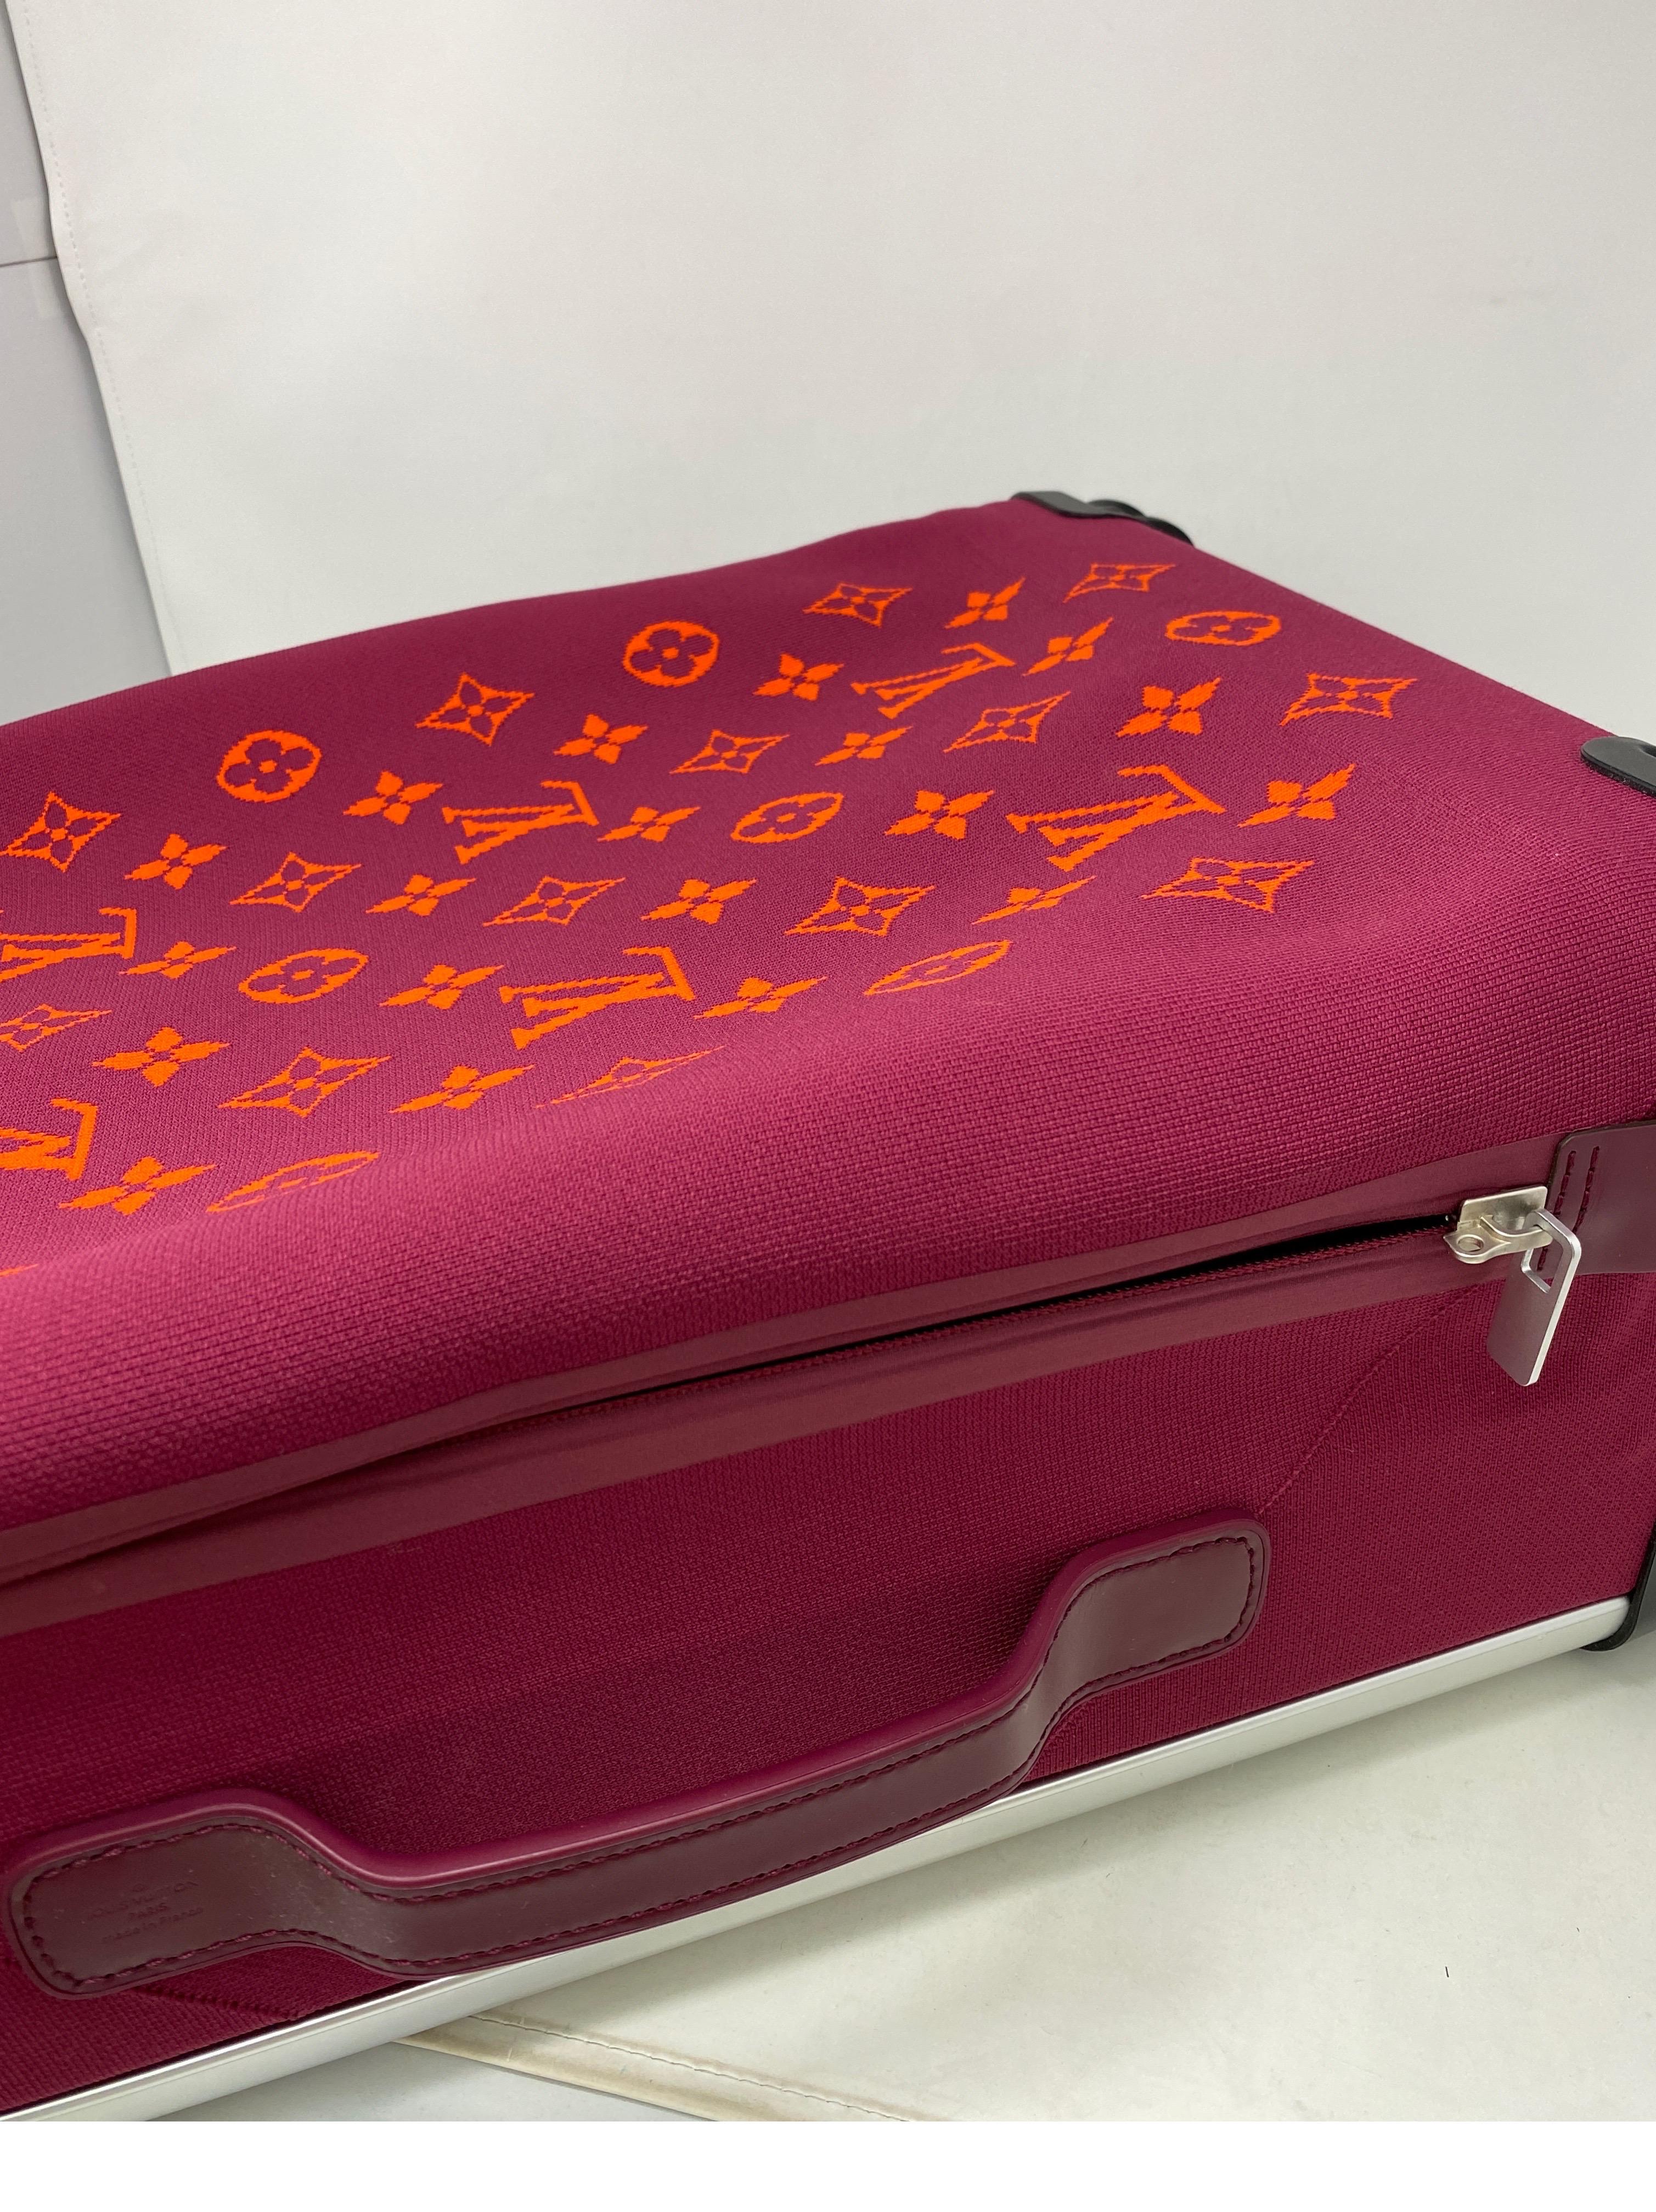 Louis Vuitton Limited Edition Roller Suitcase 6